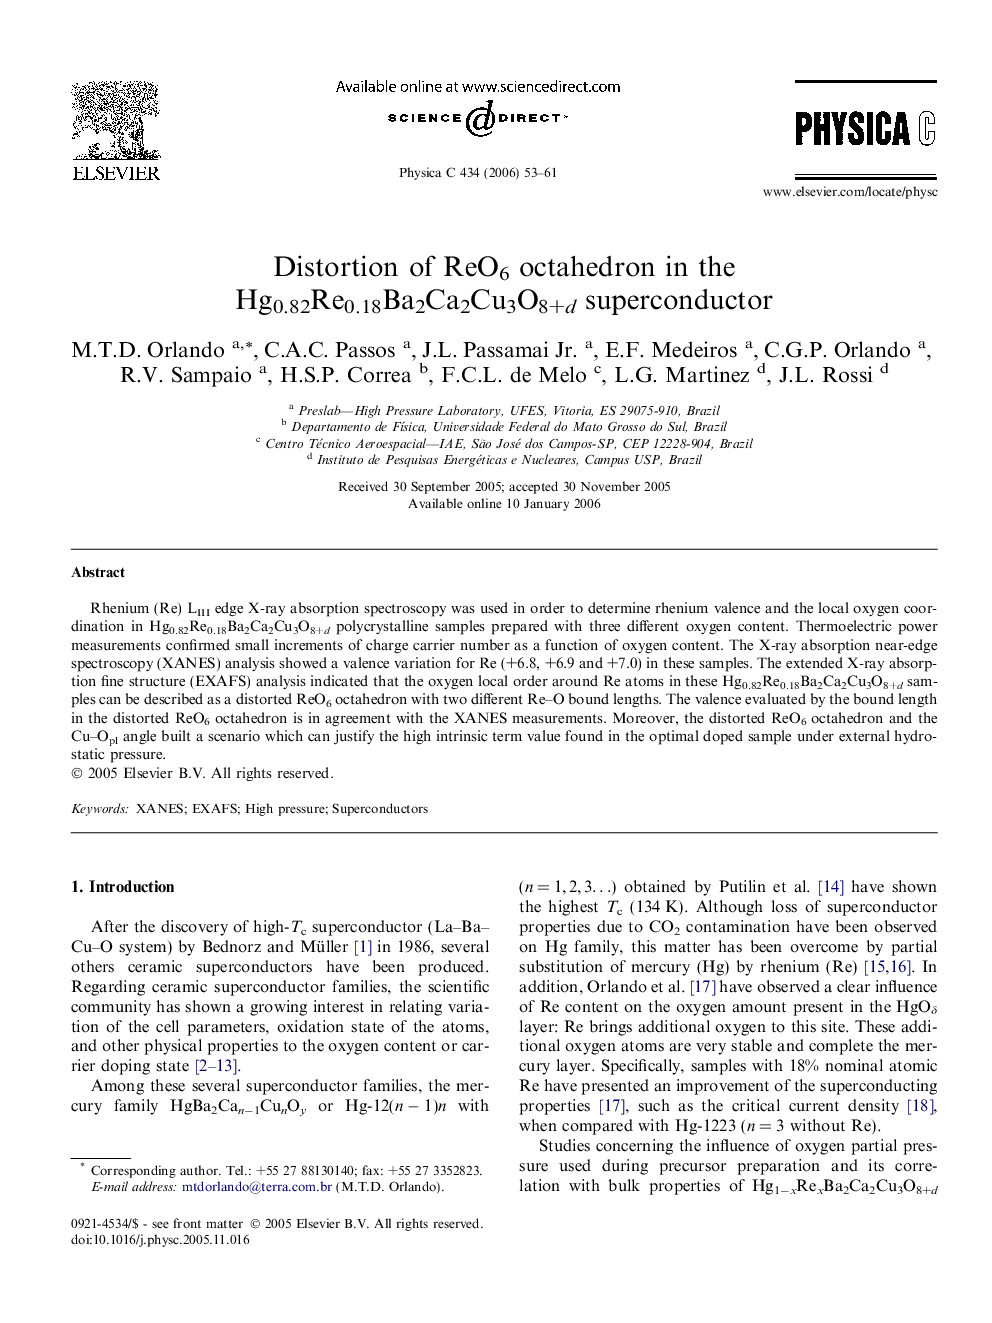 Distortion of ReO6 octahedron in the Hg0.82Re0.18Ba2Ca2Cu3O8+d superconductor